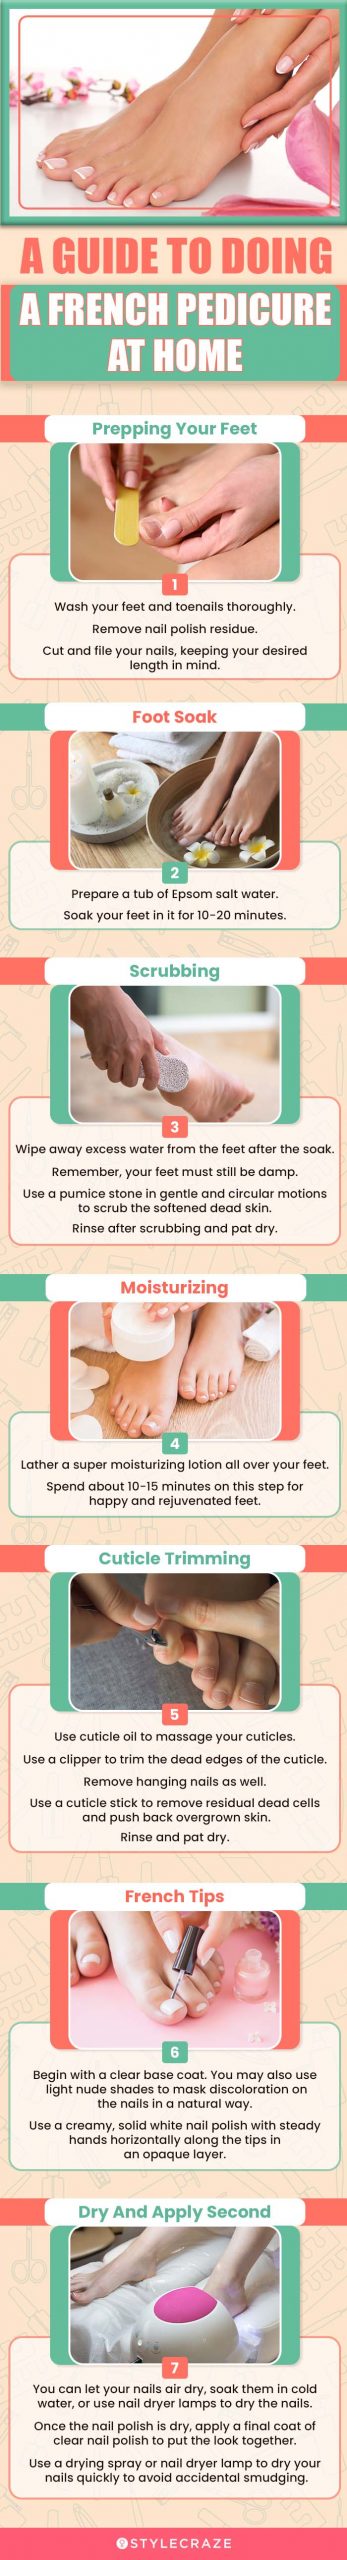 a guide to doing a french pedicure at home (infographic)